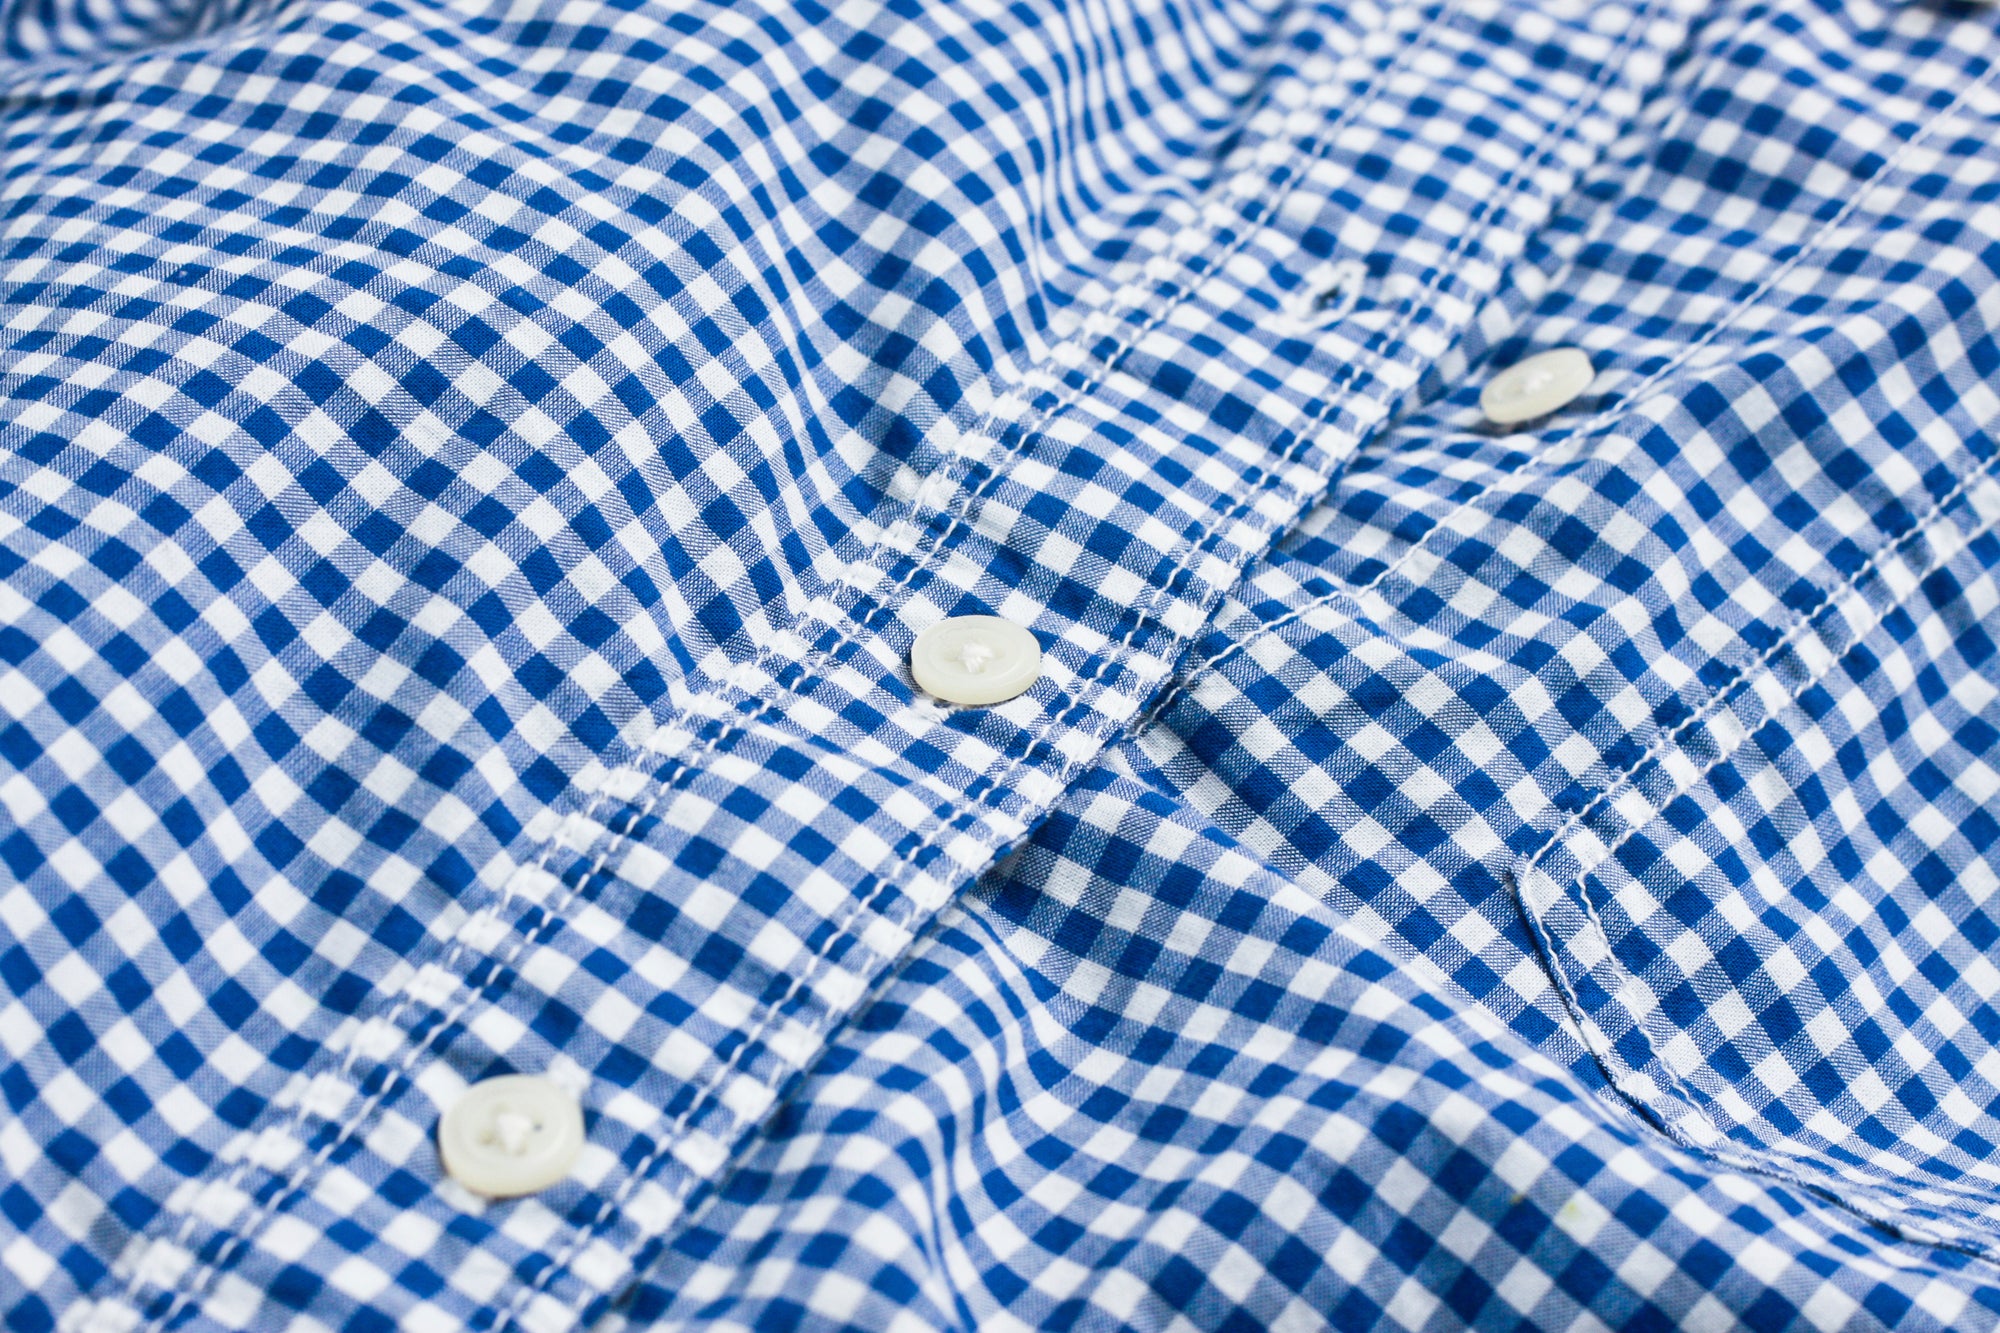 Gingham May Be the State’s Official Textile